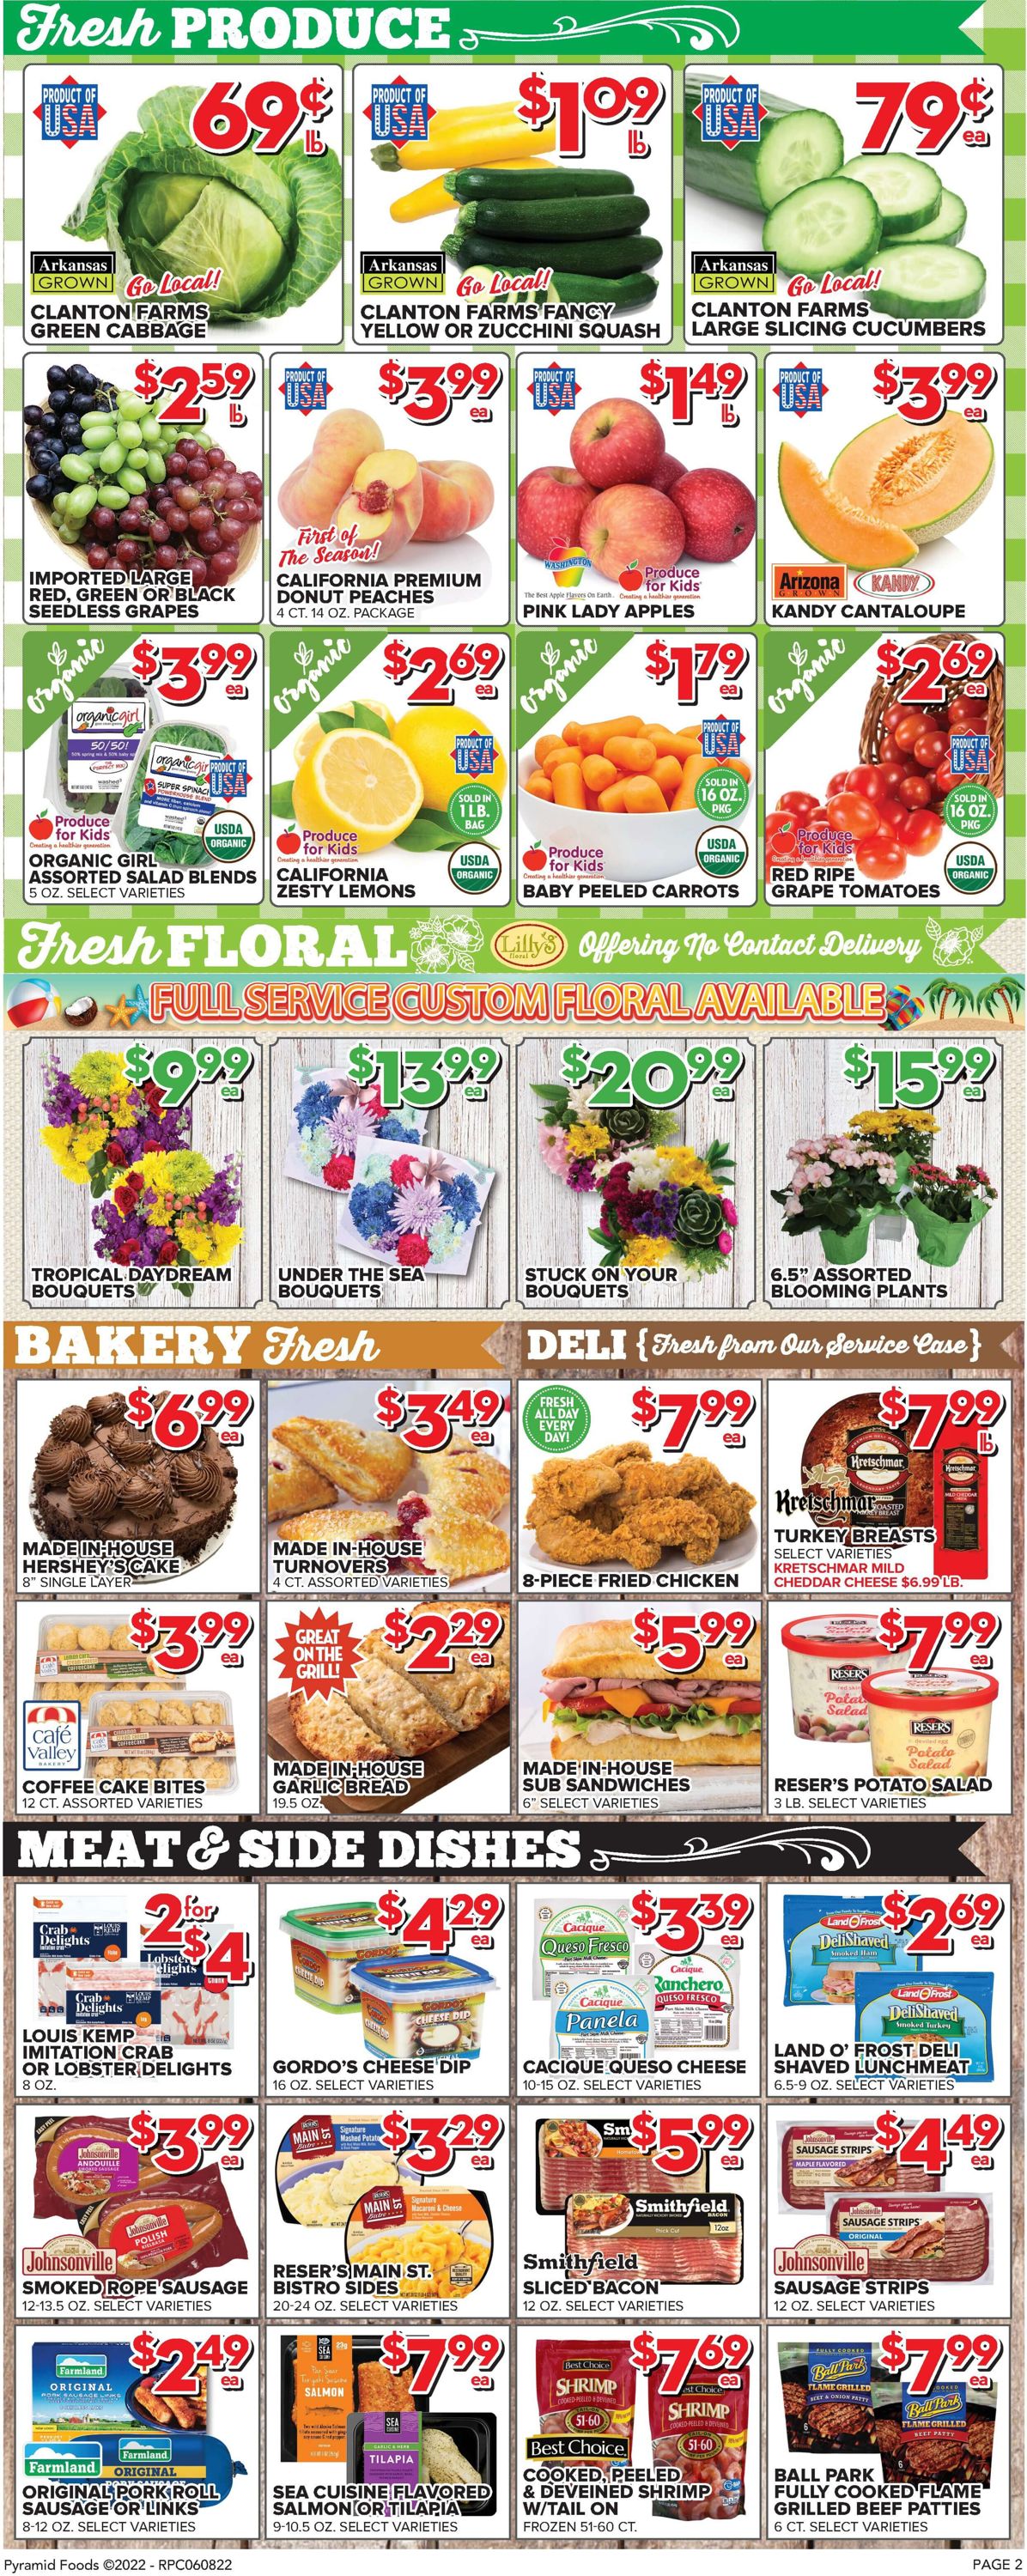 Price Cutter Weekly Ad Circular - valid 06/08-06/14/2022 (Page 2)